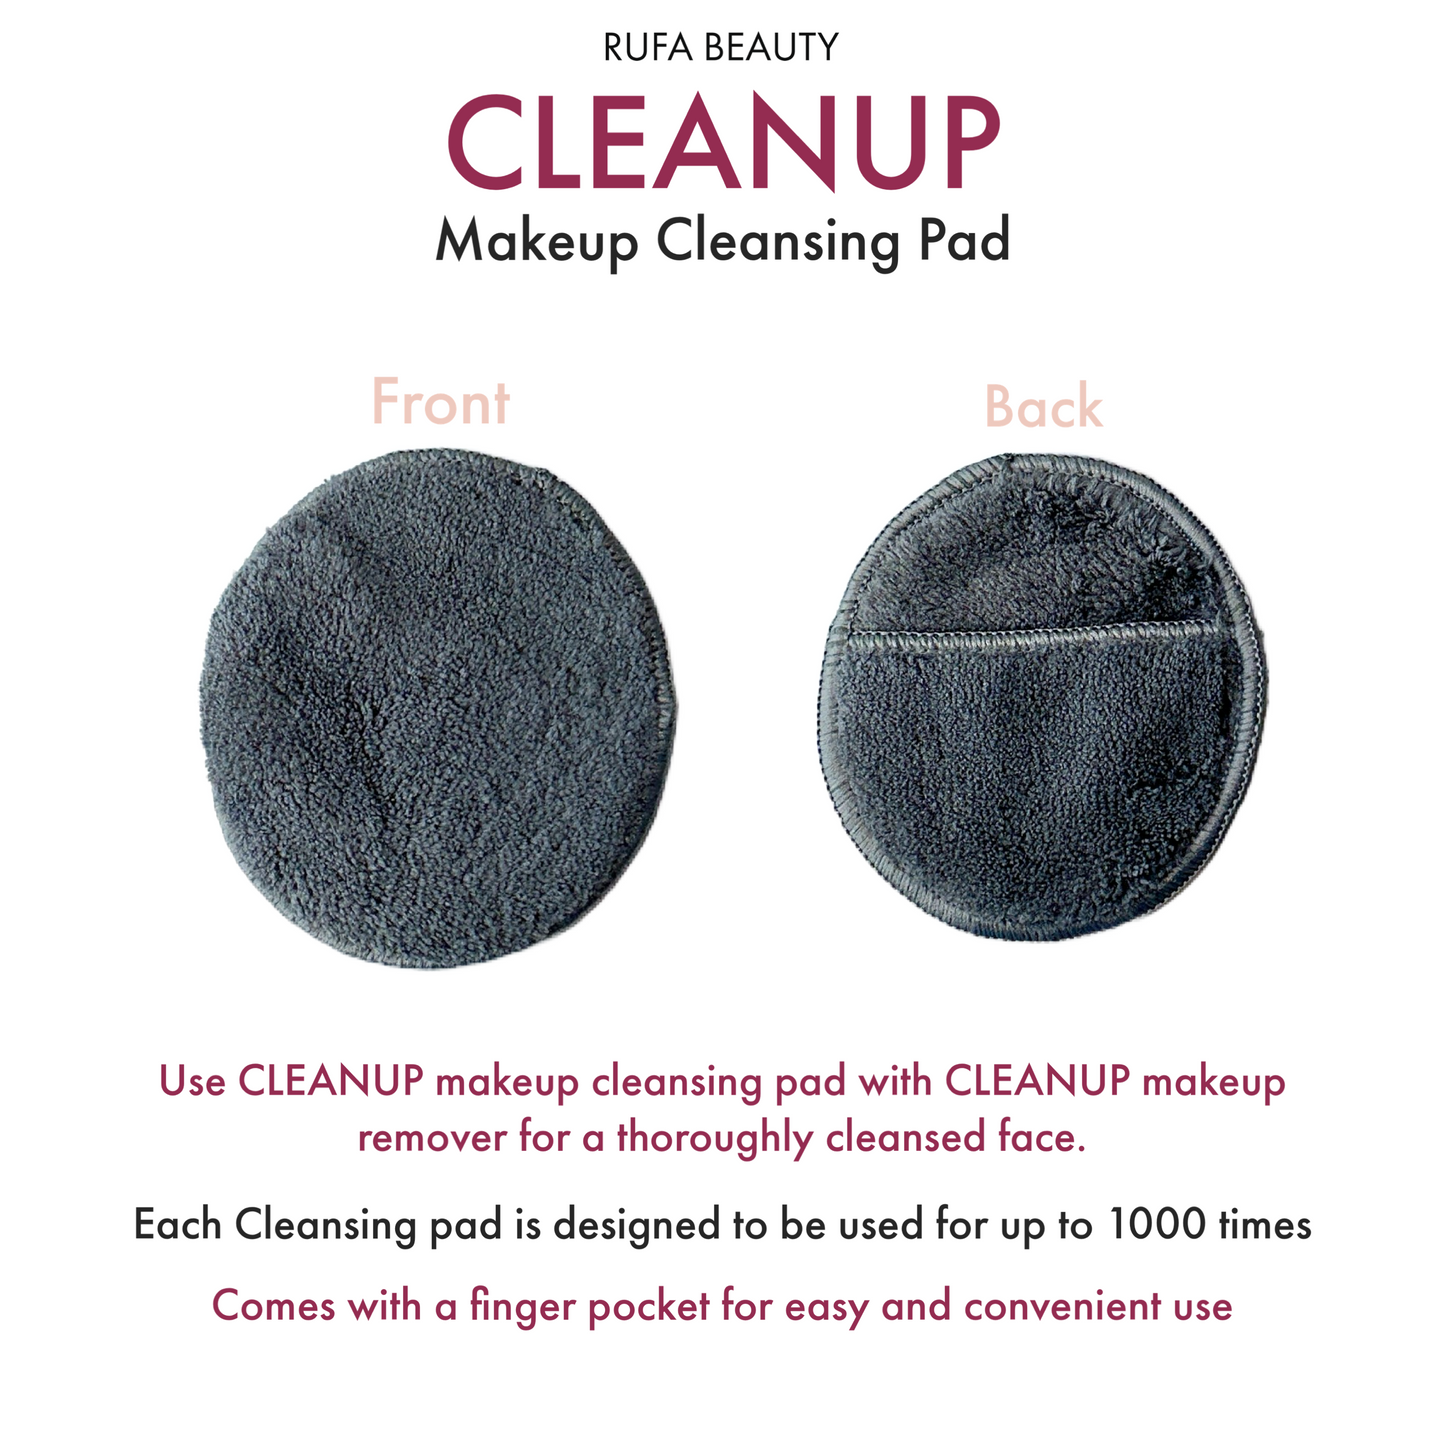 CLEANUP Cleansing Pad